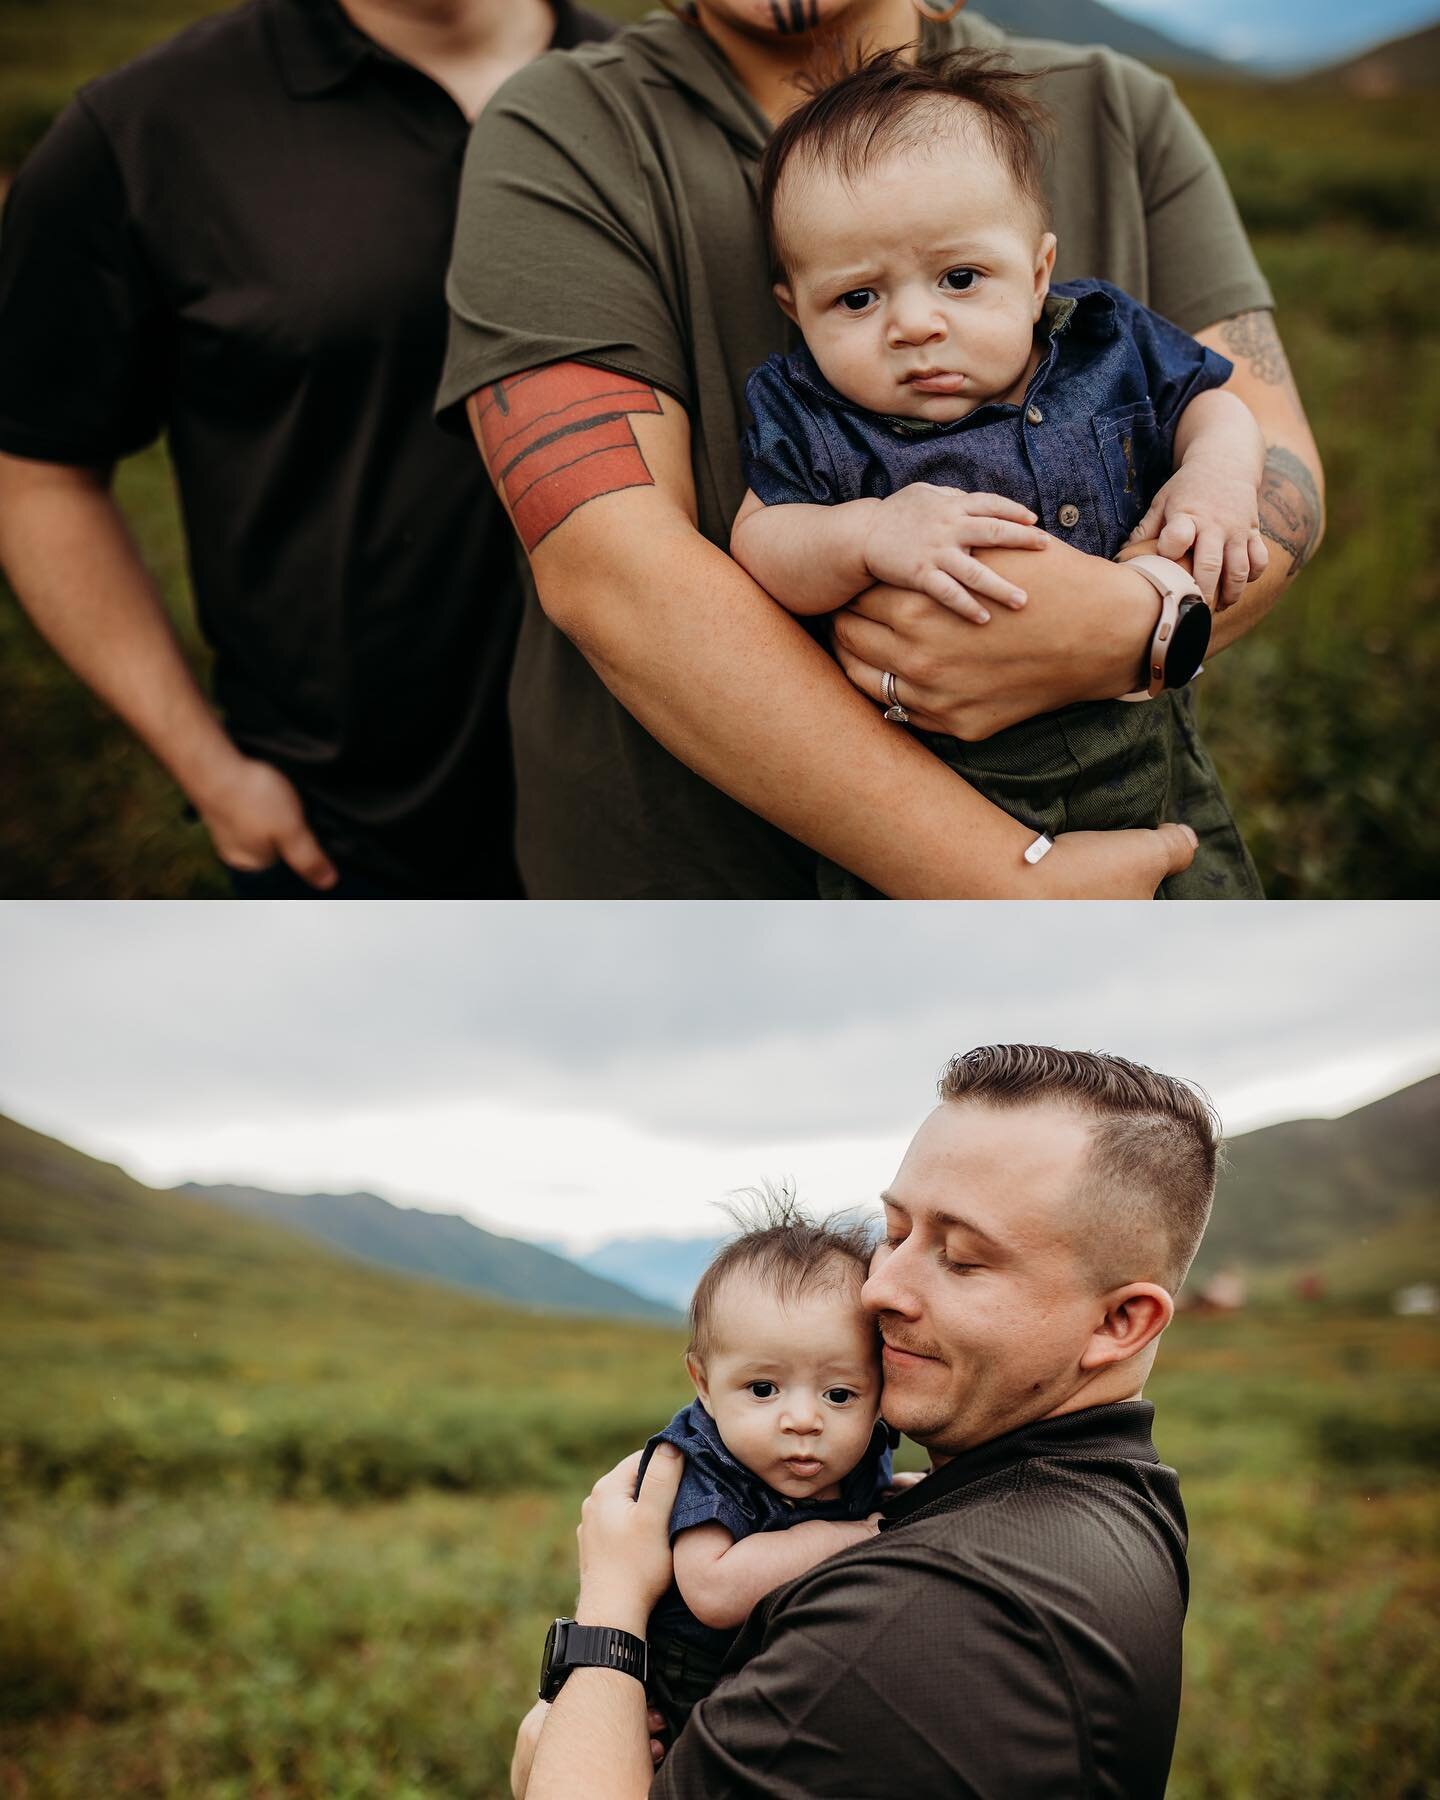 family: small moments in time creating memories that last a lifetime. 🖤

I met this couple at a marriage retreat last year, she was 3 months pregnant when I met her and now her sweet boy is 3 months and I got to meet him and did their family picture